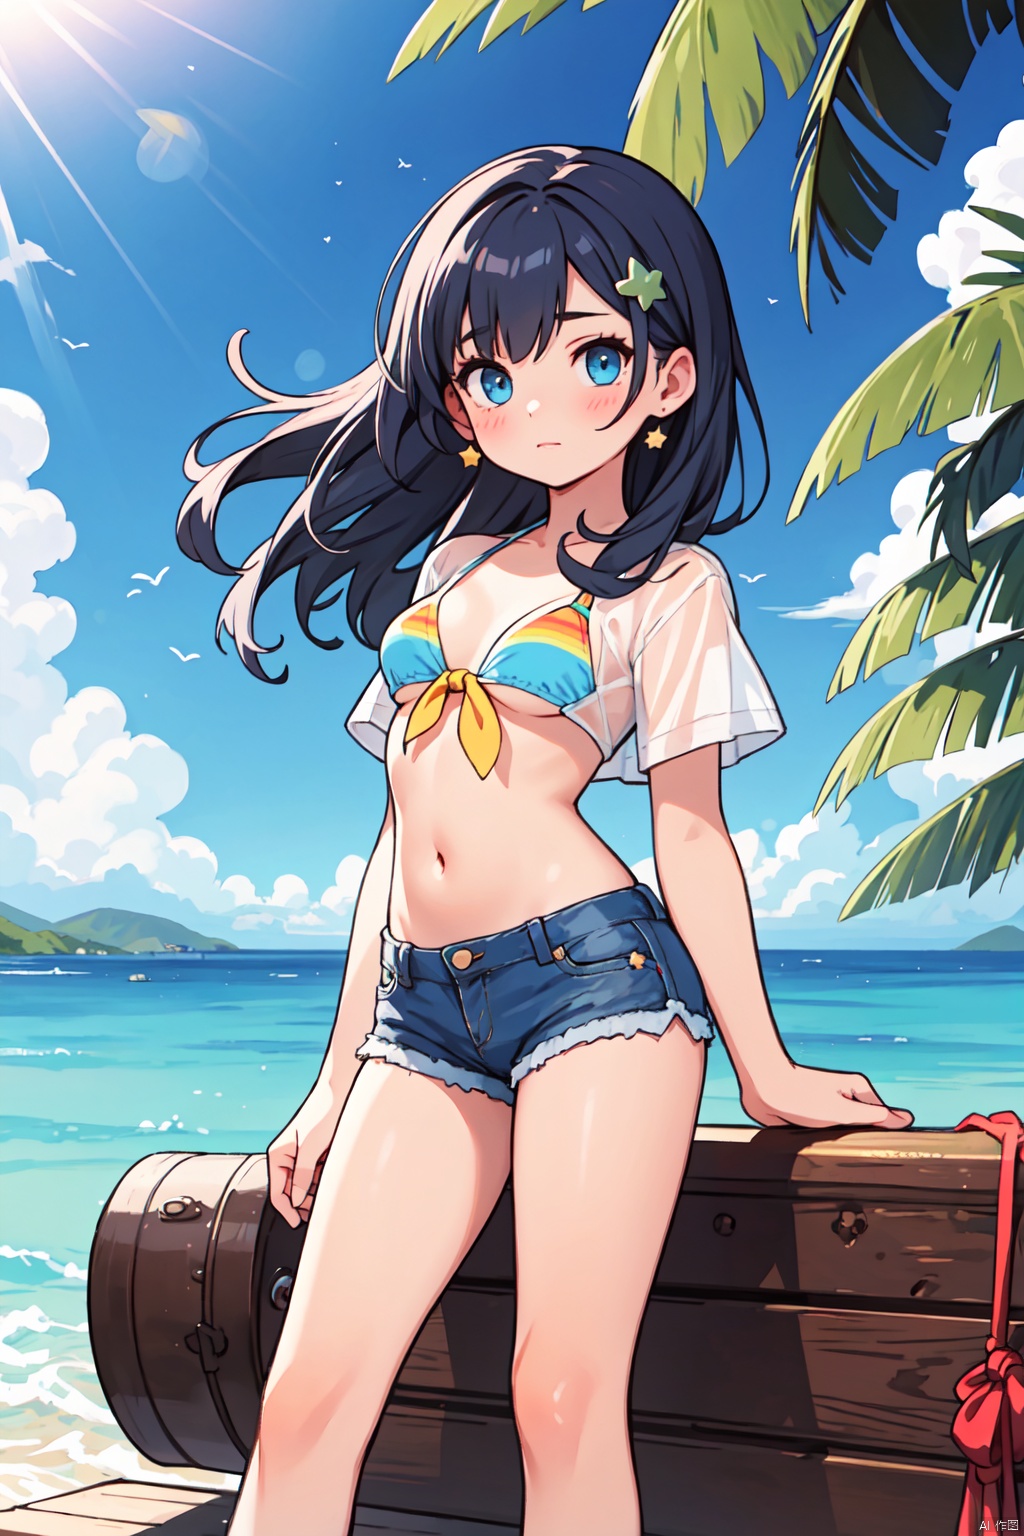 masterpiece, best quality,A girl with long blue hair and blue eyes, wearing a bikini under denim shorts and a tied white shirt, standing on a boat in the ocean under a clear blue sky. She has a crop top revealing a small stomach and is looking directly at the viewer with a closed mouth. Her hair is floating in the sunlight, and there are palm trees and a star symbol in her eye, symbolizing a sense of wonder and adventure. The scene is vibrant with vivid colors and a tropical atmosphere, featuring clouds, a star symbol, and a tree in the background to enhance the overall composition.